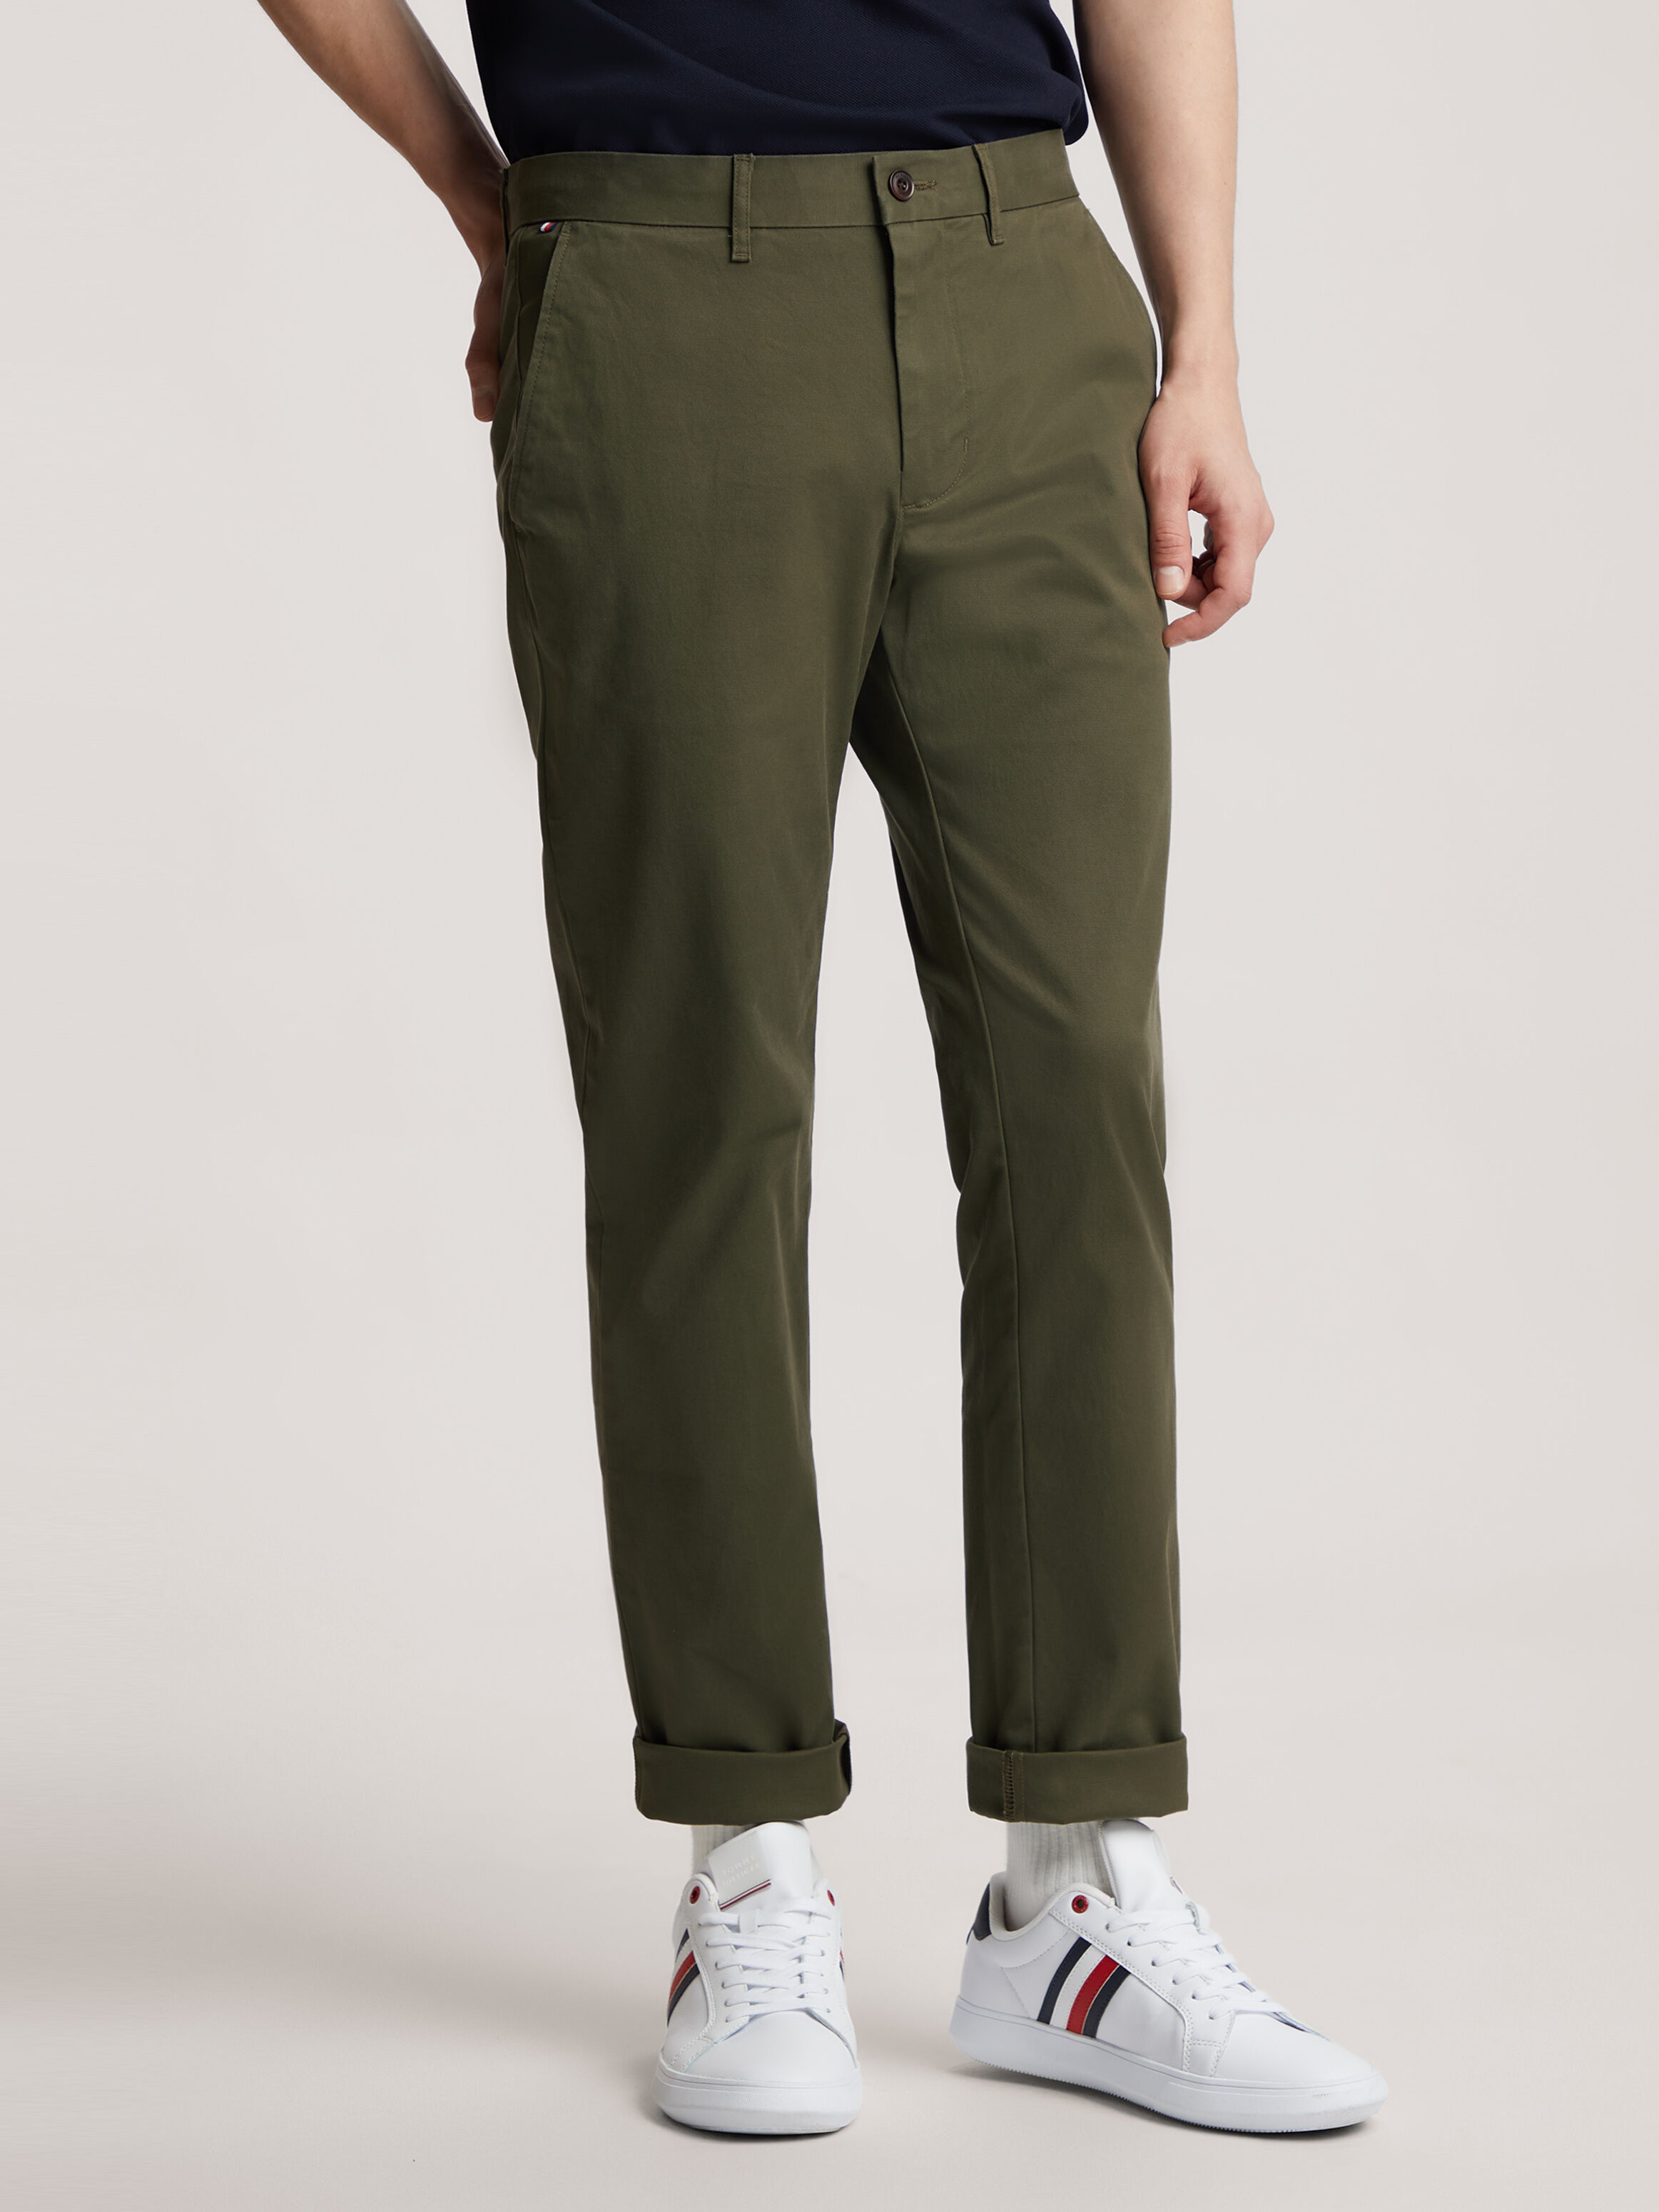 Uniqlo Singapore - Chino Pants Whatever your style, you'll find the perfect  pair. Shop now: http://s.uniqlo.com/2xO1lCN | Facebook